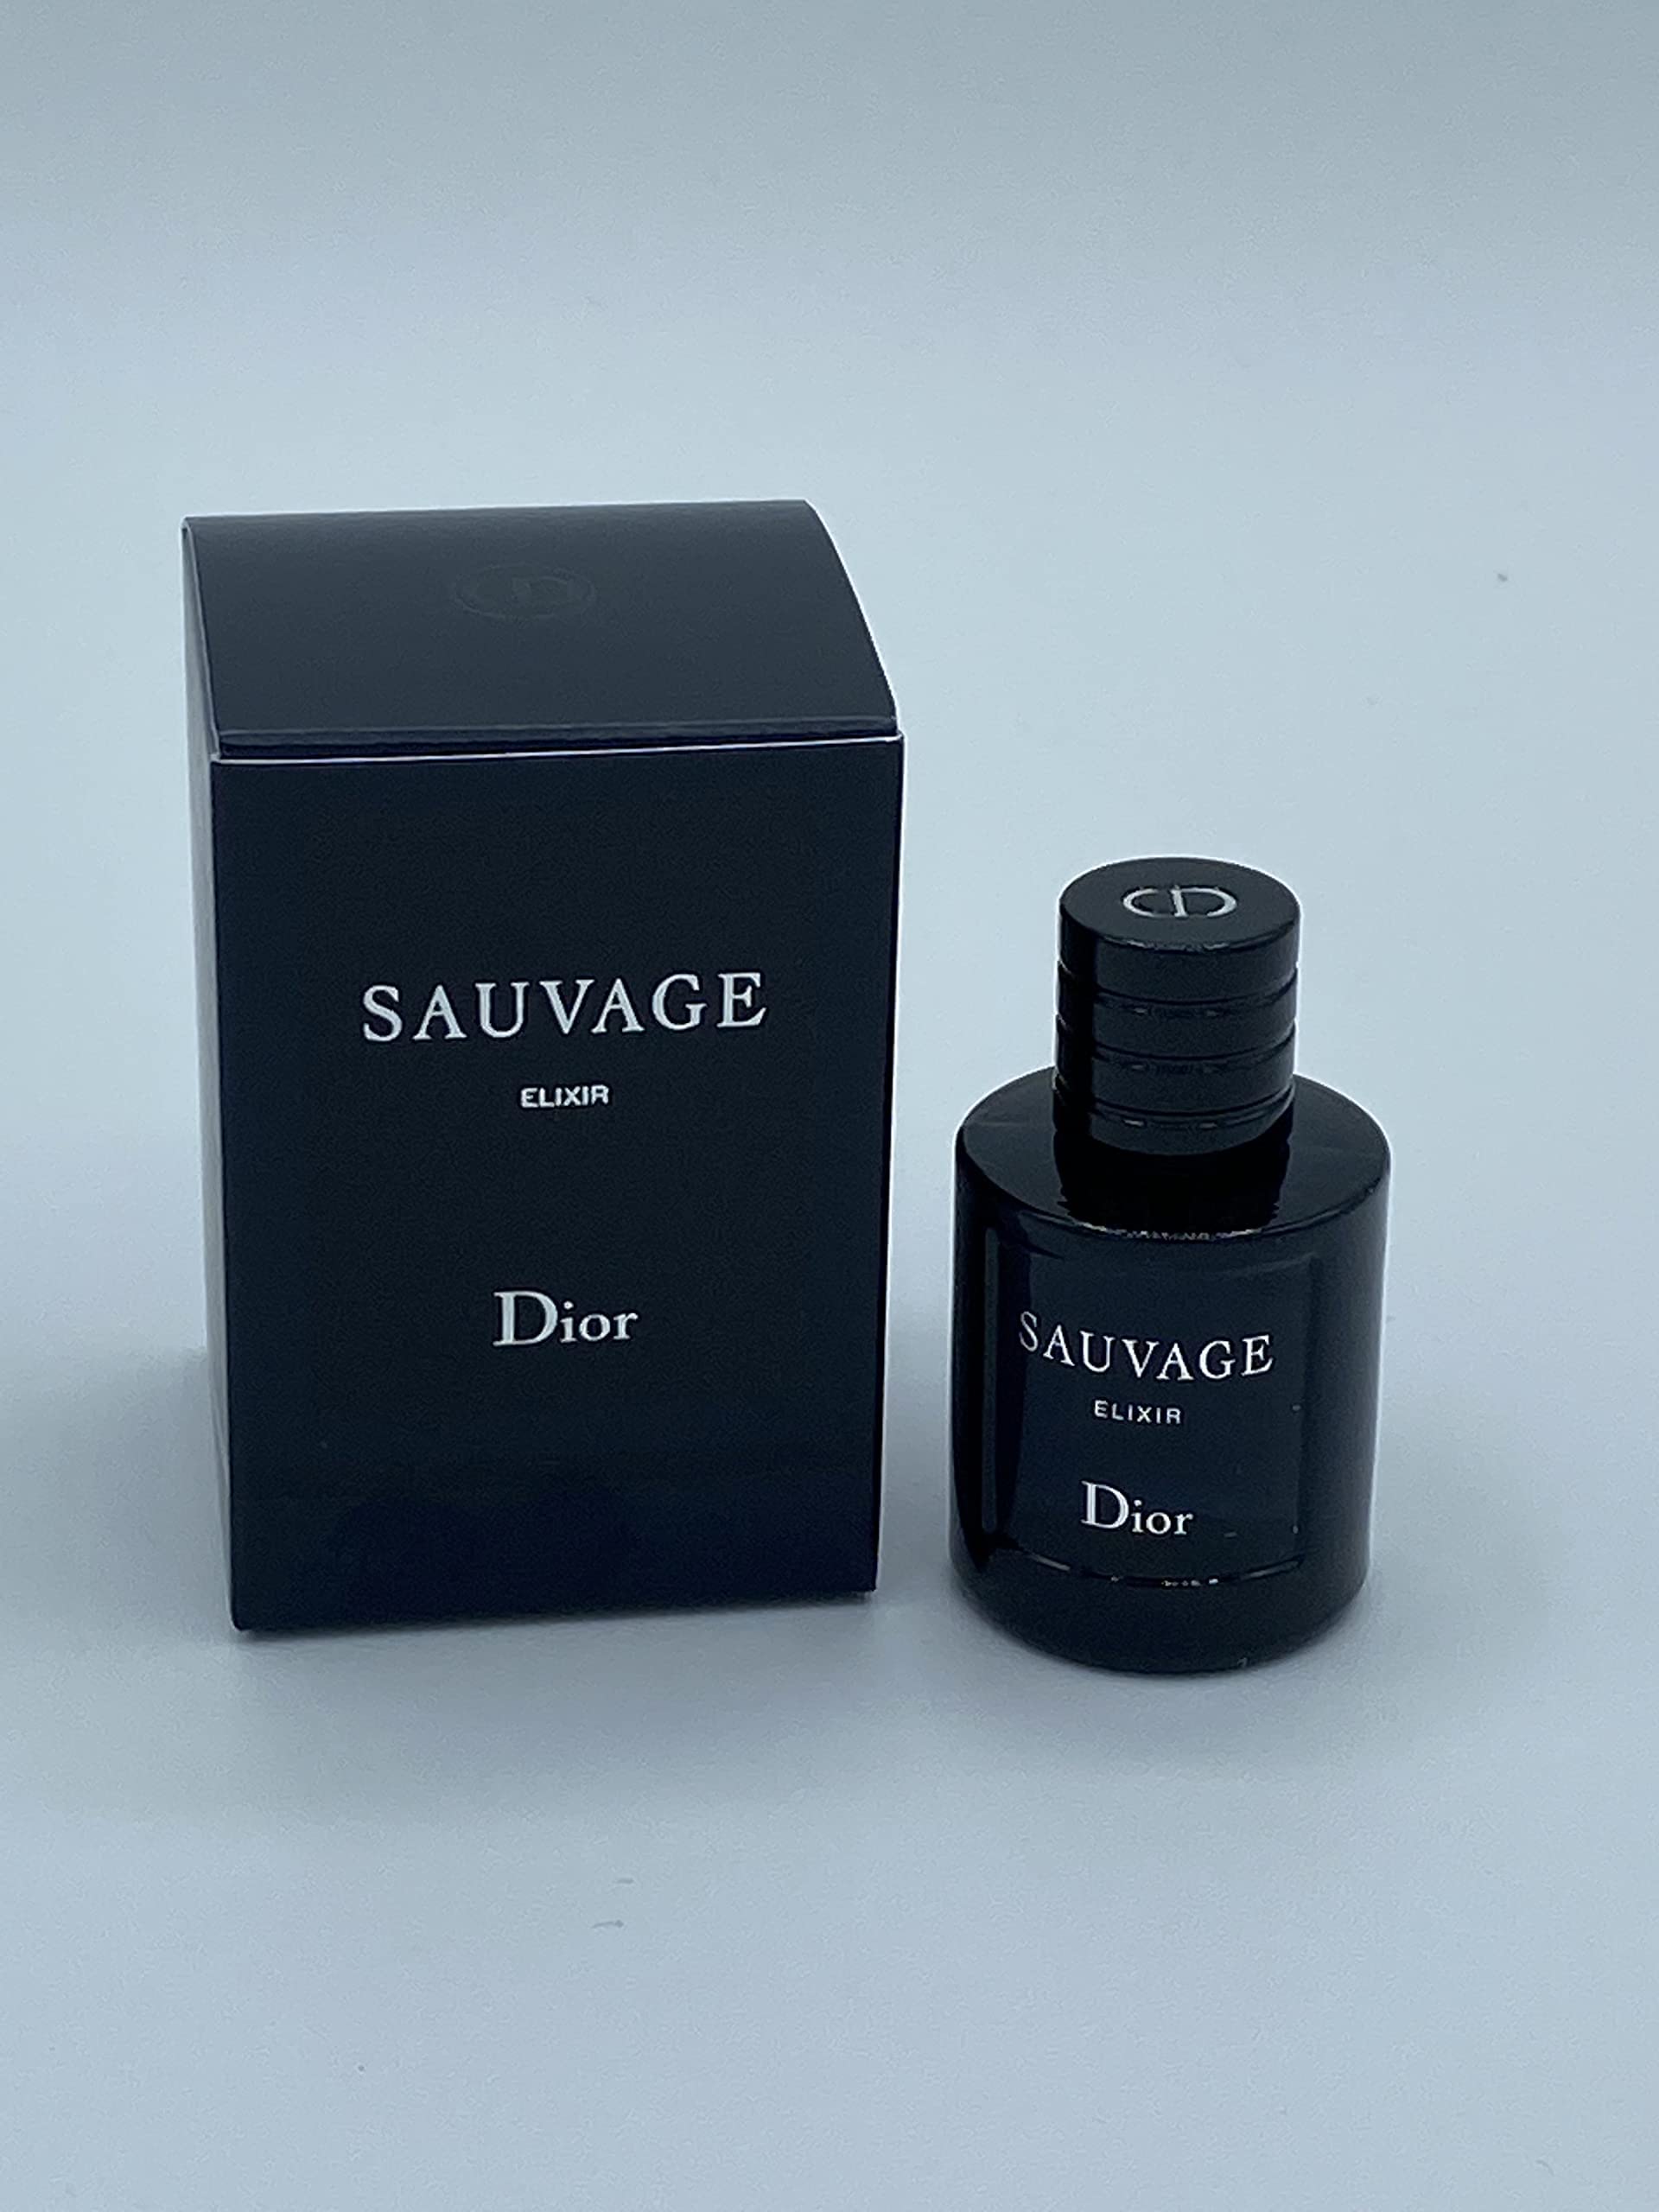 New Fragrance for Men Dior Sauvage Eau de Toilette Review  The Happy  Sloths Beauty Makeup and Skincare Blog with Reviews and Swatches